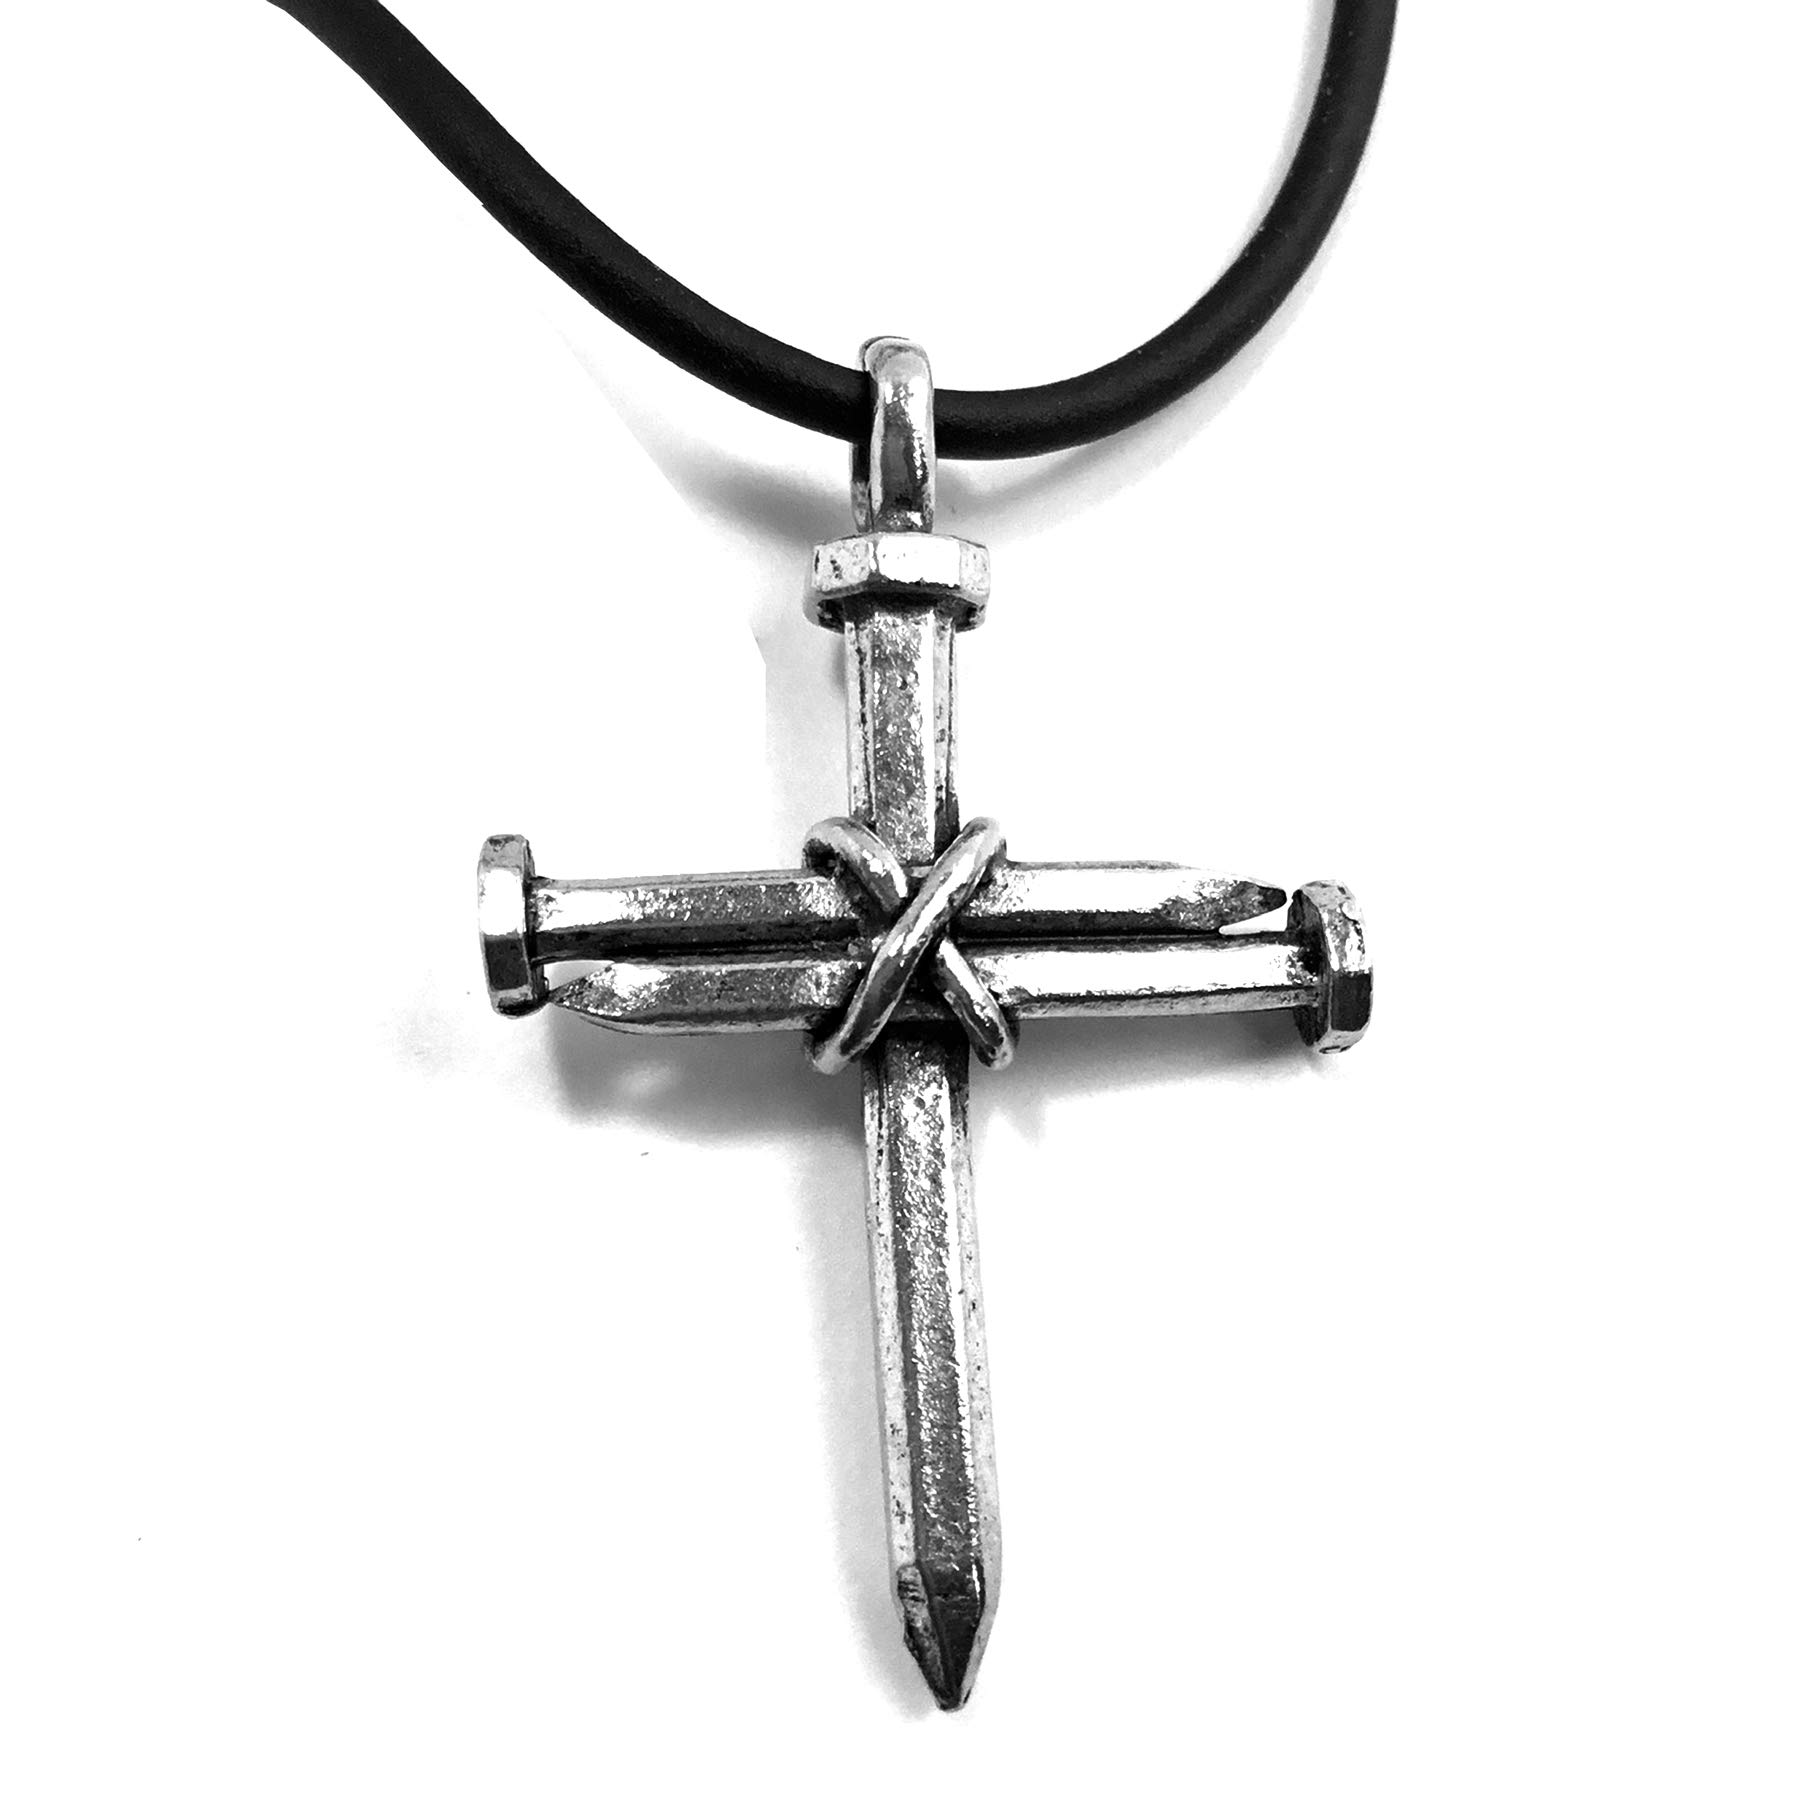 FORGIVEN JEWELRY Antique Nail Cross Necklace